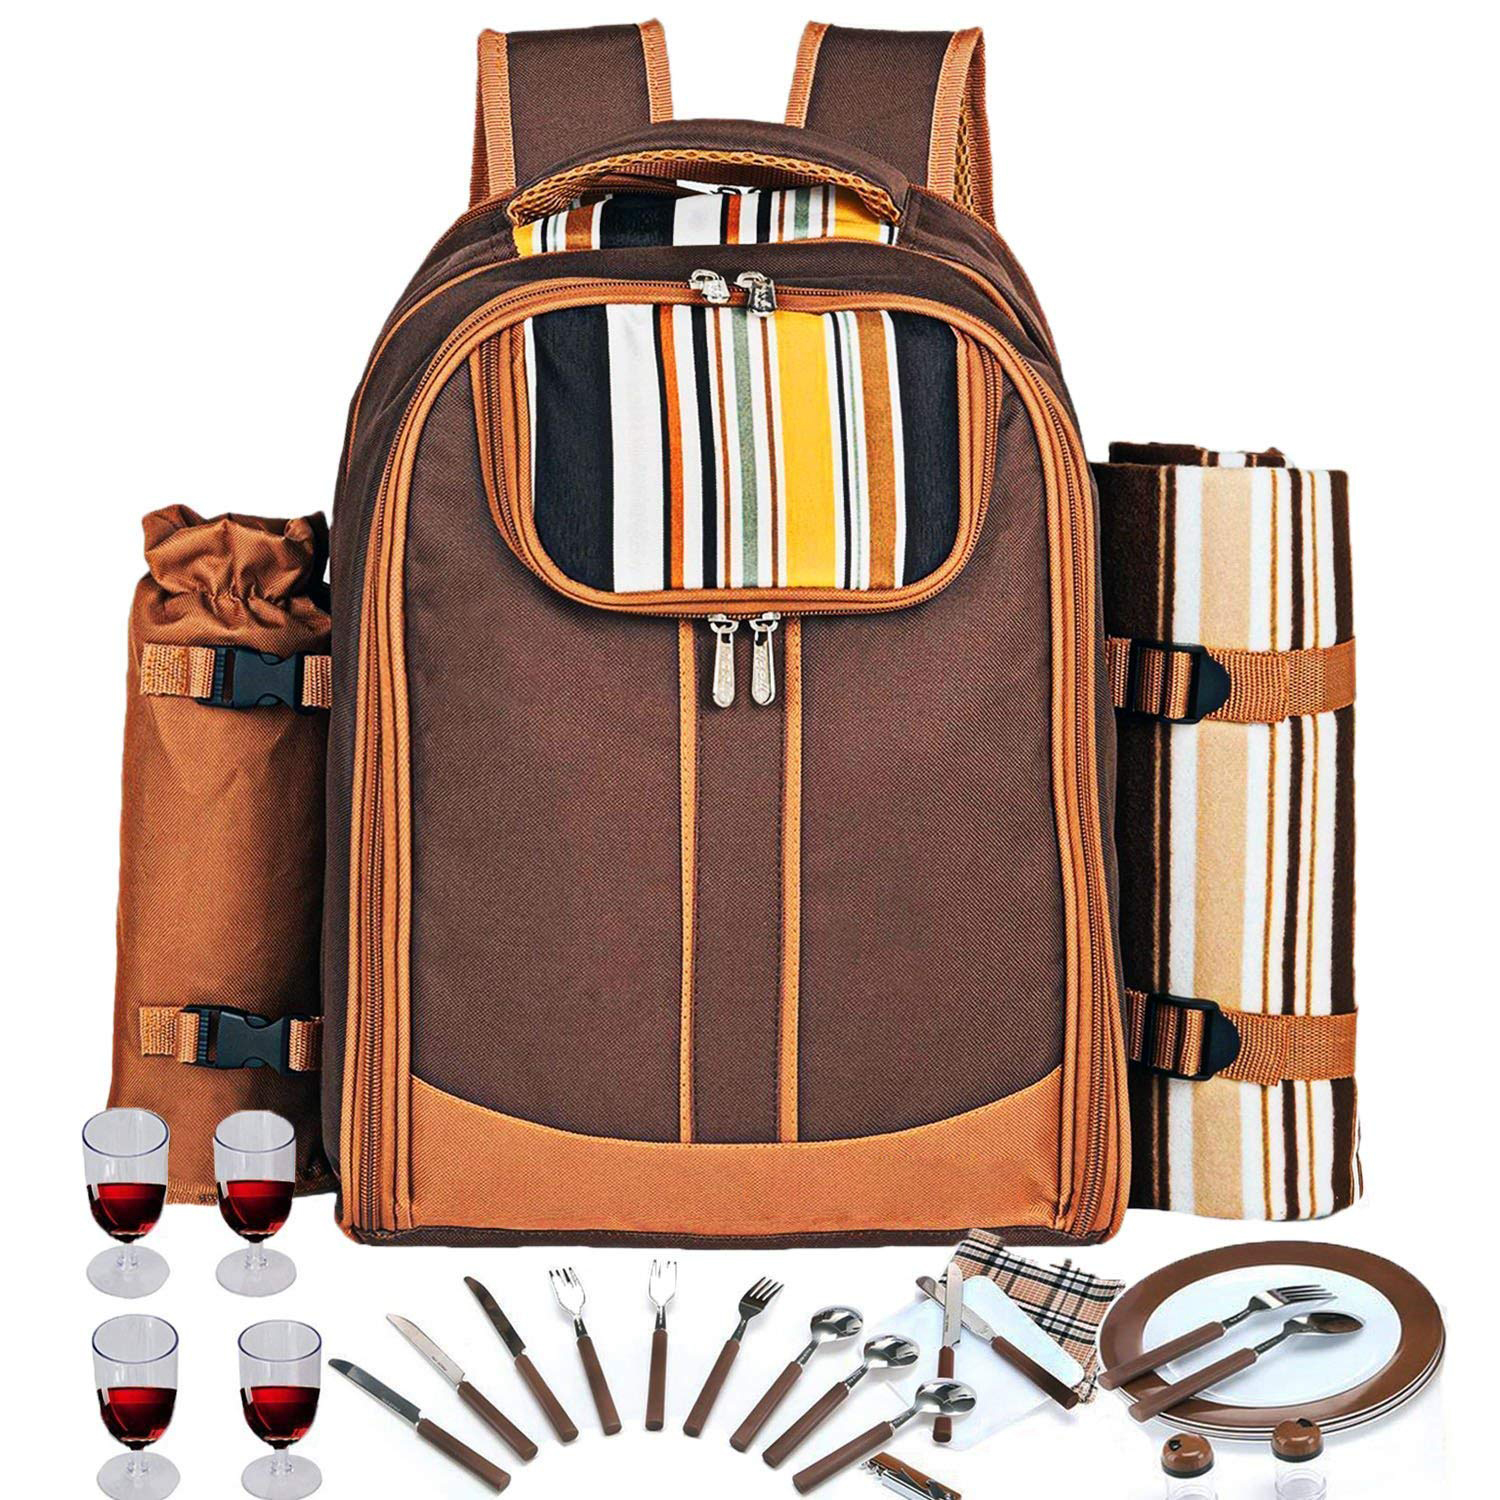 Dropship Picnic Backpack Set With Cutlery Kit Cooler Compartment